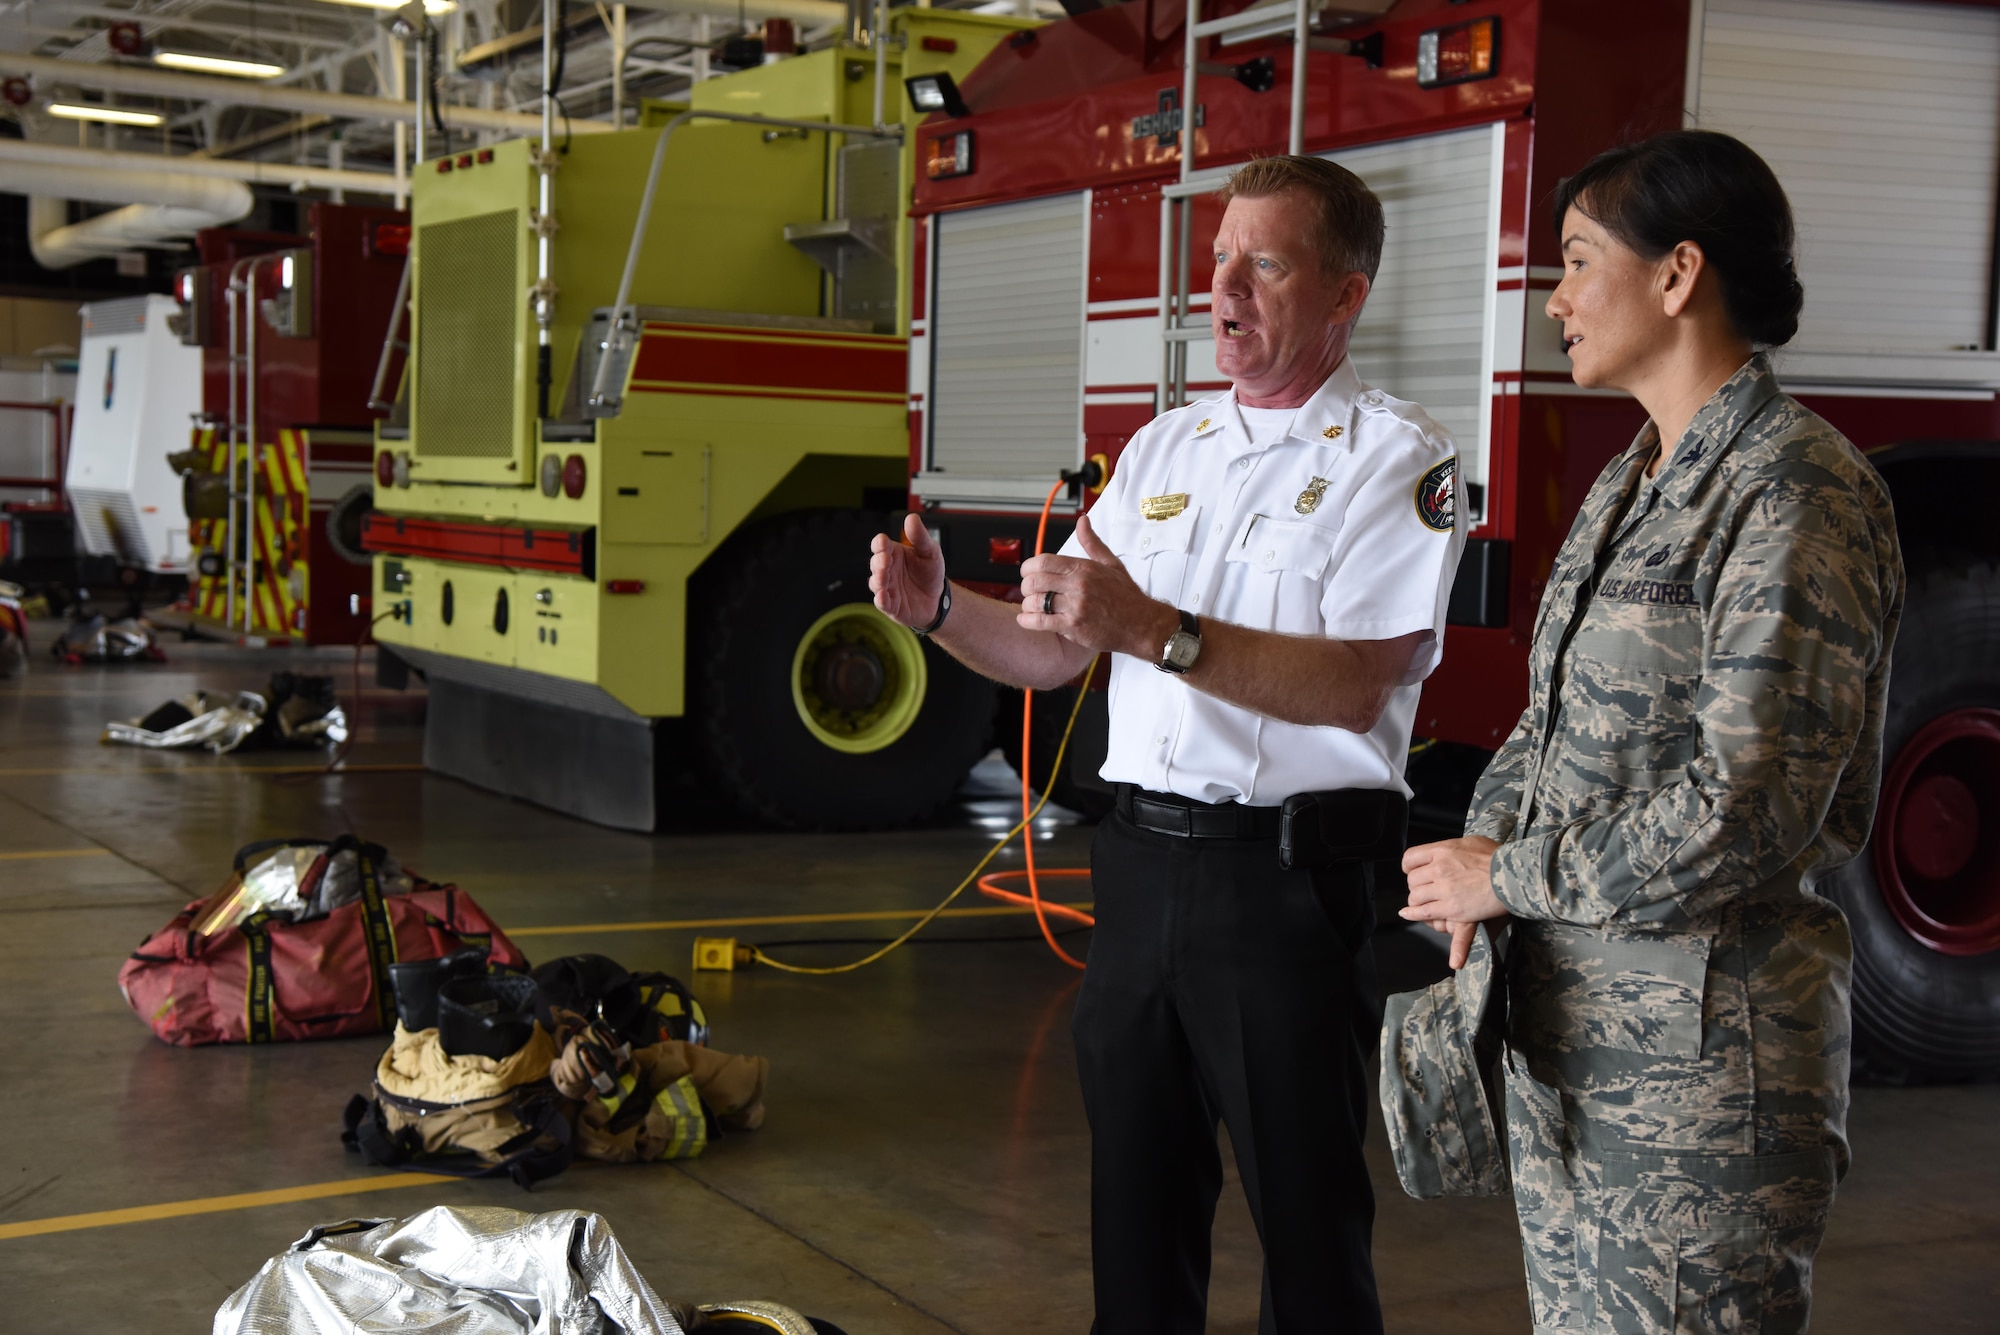 Gary Pierson, 81st Infrastructure Division deputy fire chief, provides a tour of the fire department to Col. Debra Lovette, 81st Training Wing commander, during a 81st Mission Support Group orientation tour June 29, 2017, on Keesler Air Force Base, Miss. The tour familiarized Lovette with the group’s mission, operations and personnel. (U.S. Air Force photo by Kemberly Groue)